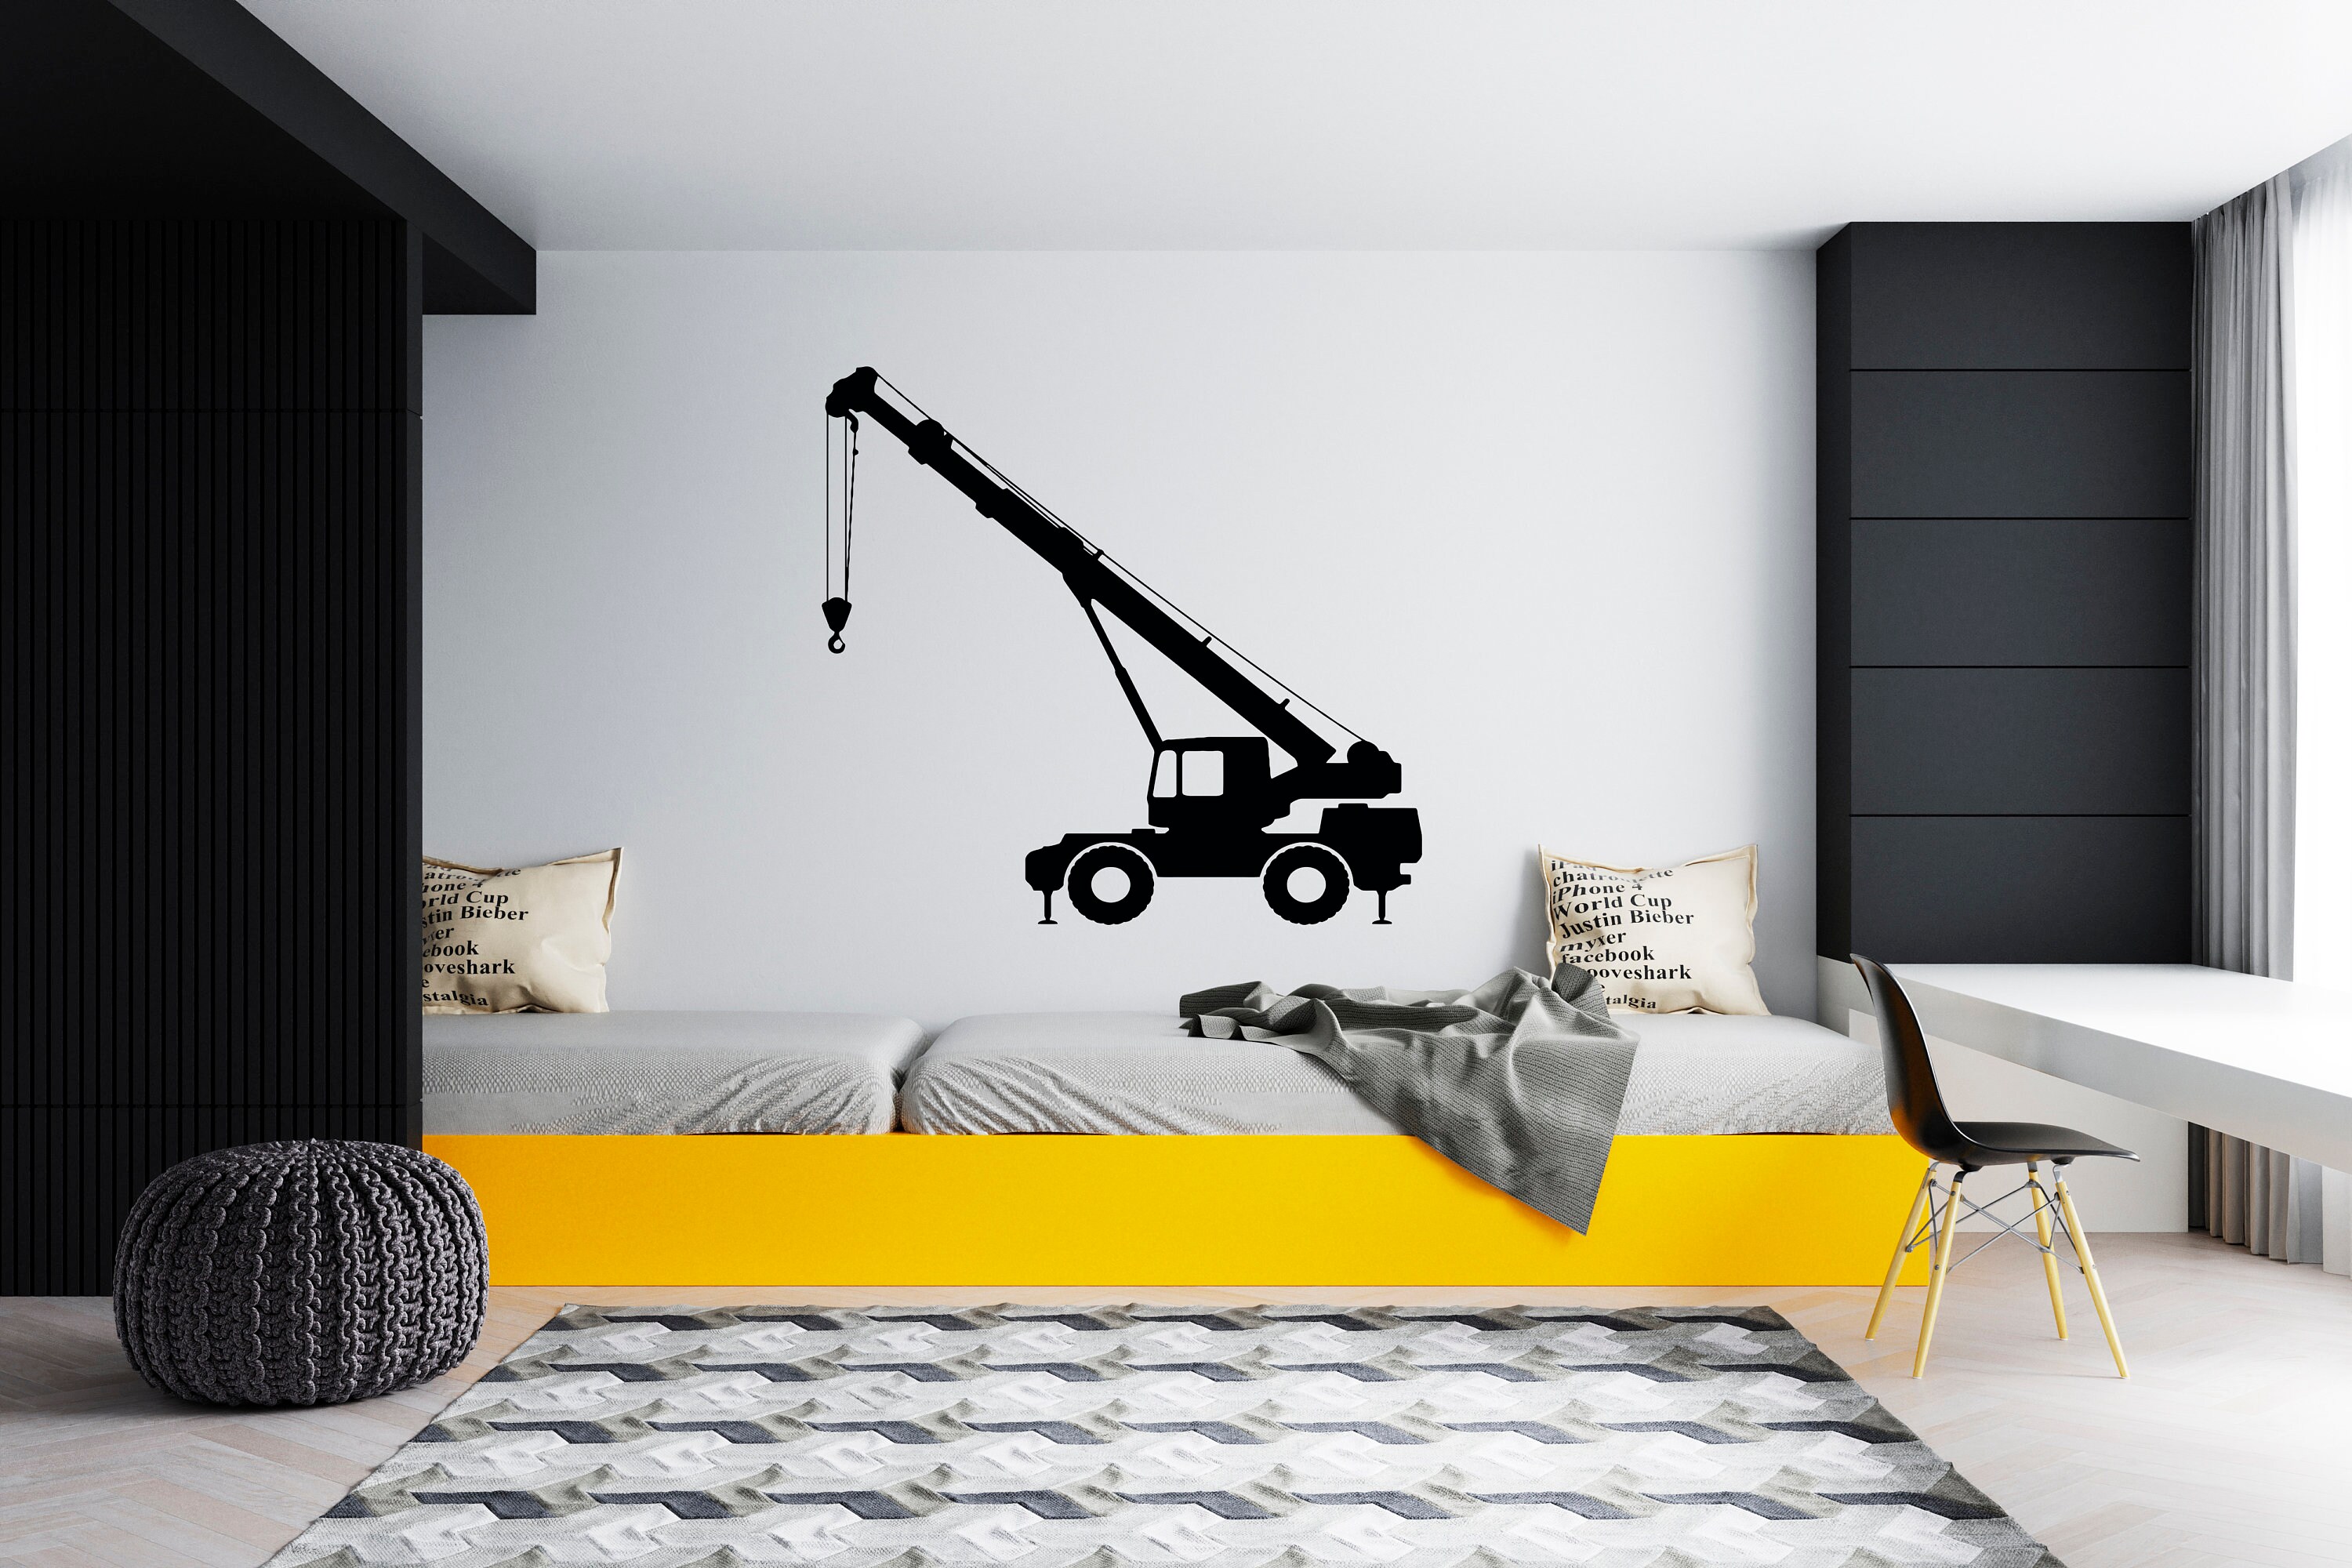 Large Crane Construction Building Wall Decal Sticker WS-17303 